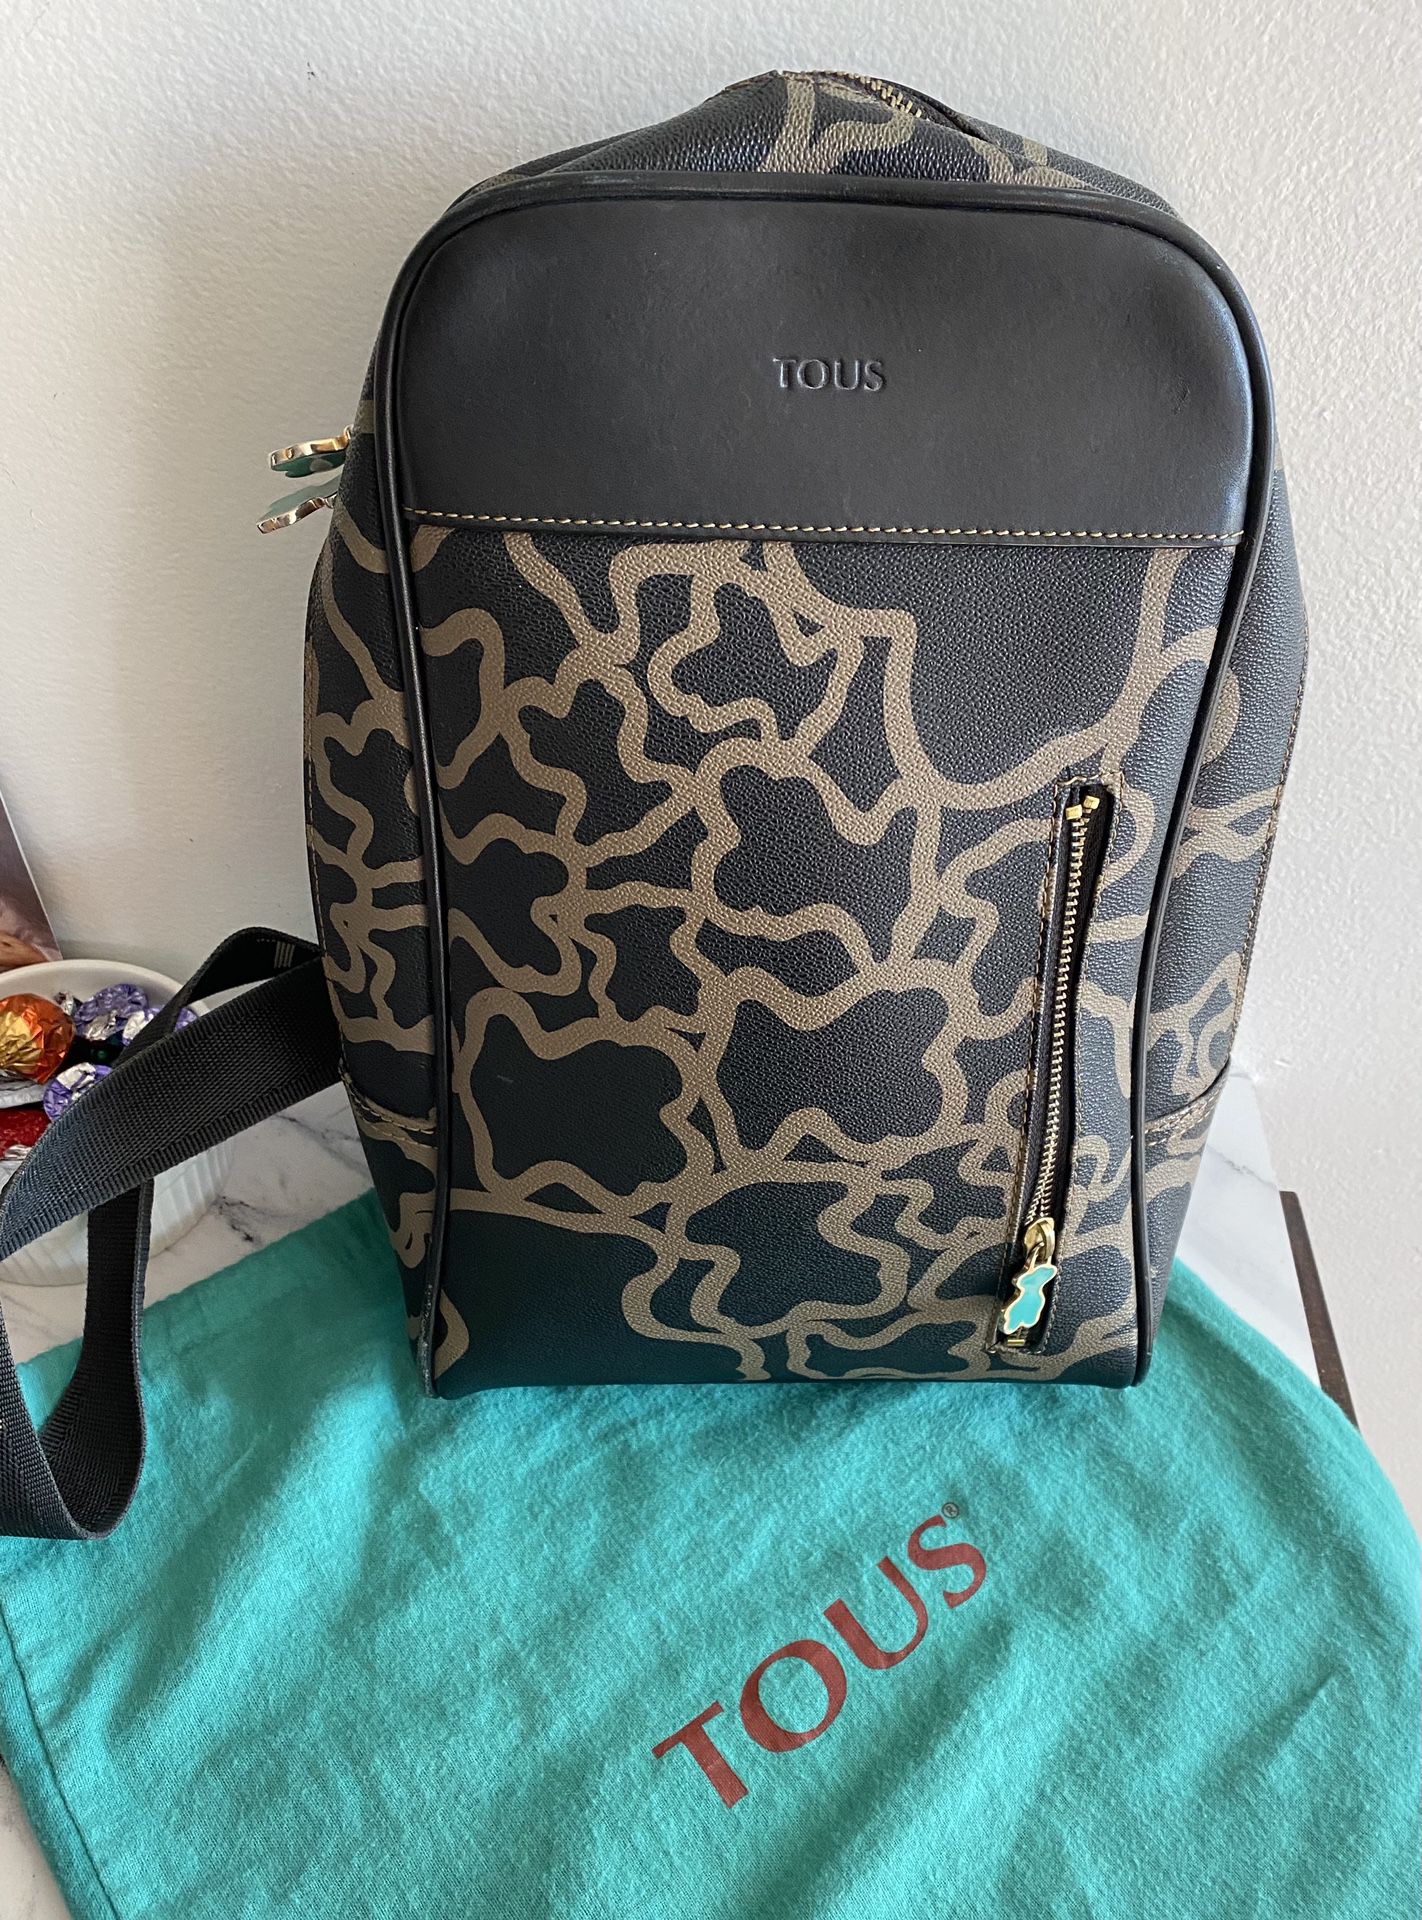 Tous Backpack Authentic 